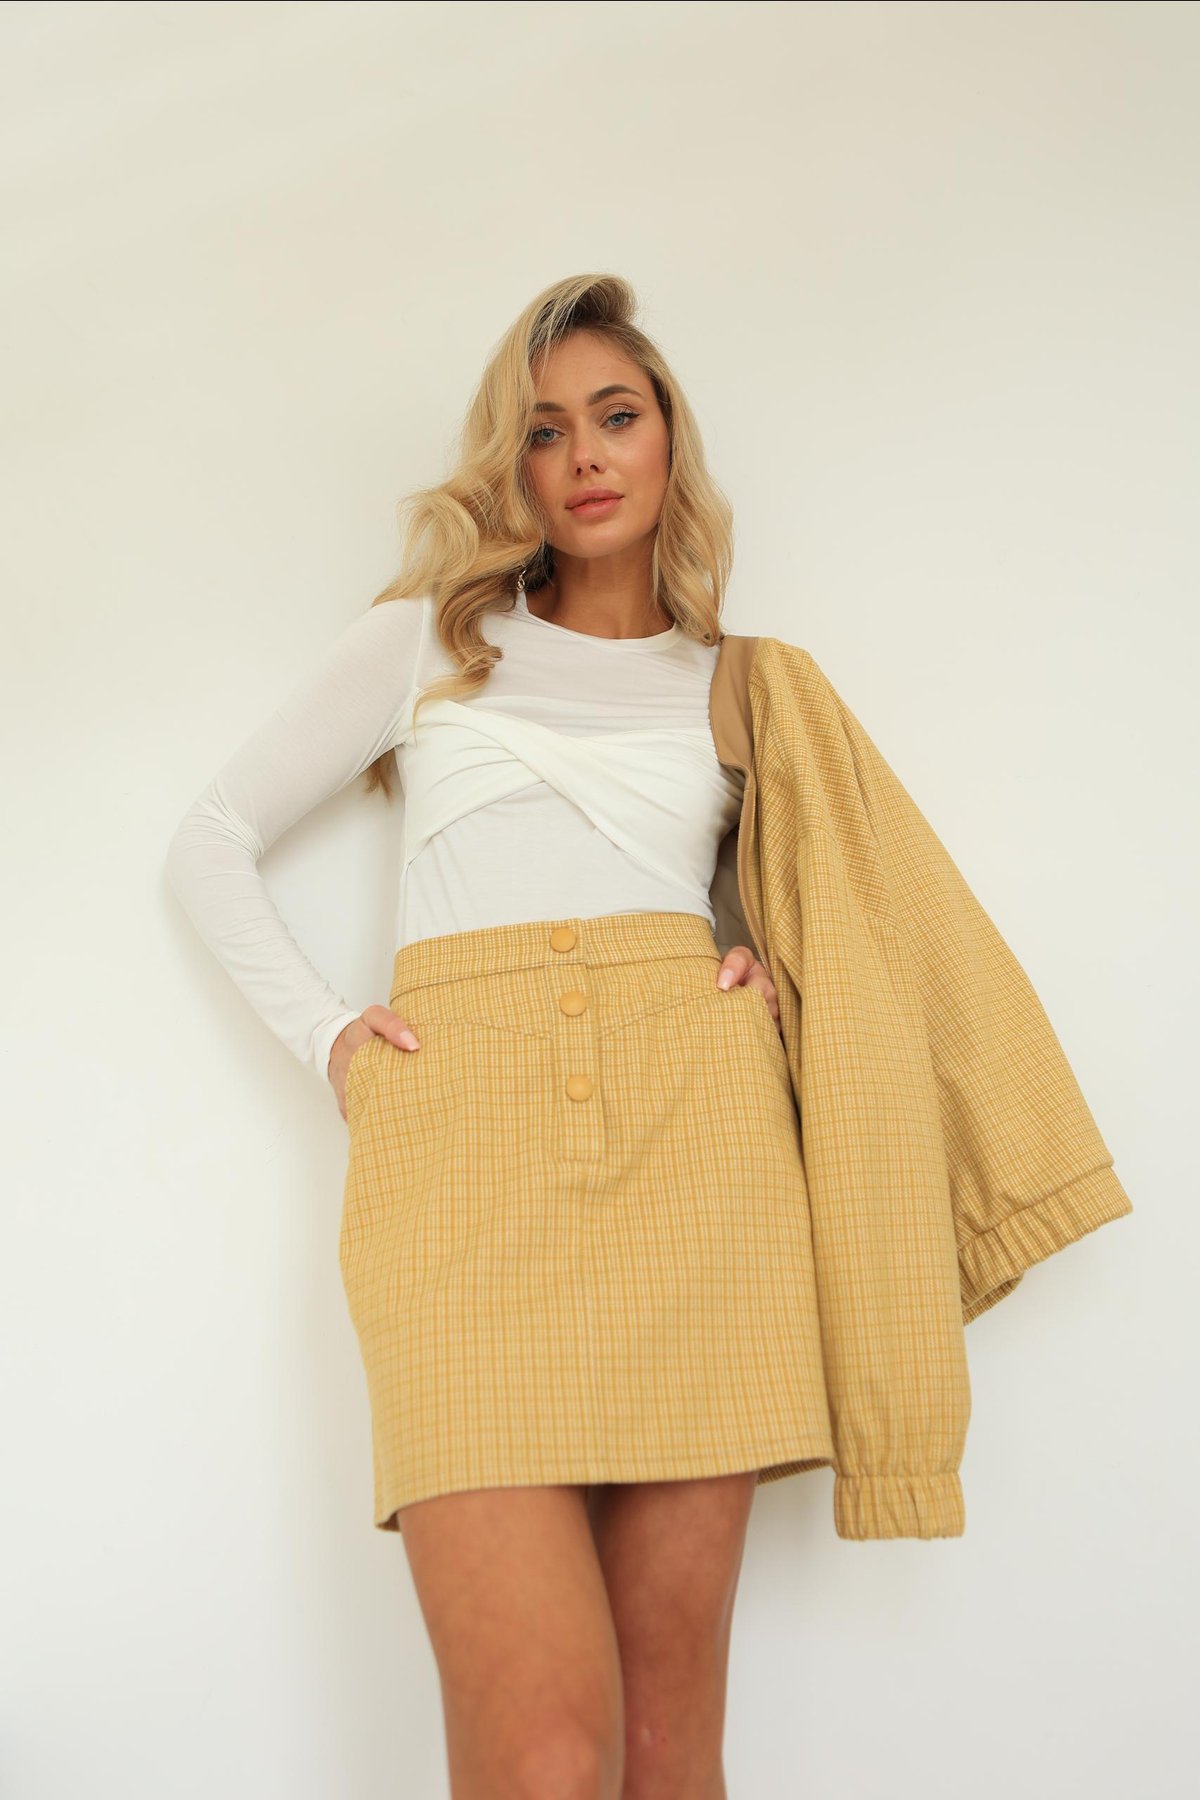 Beige skirt in a checkered pattern